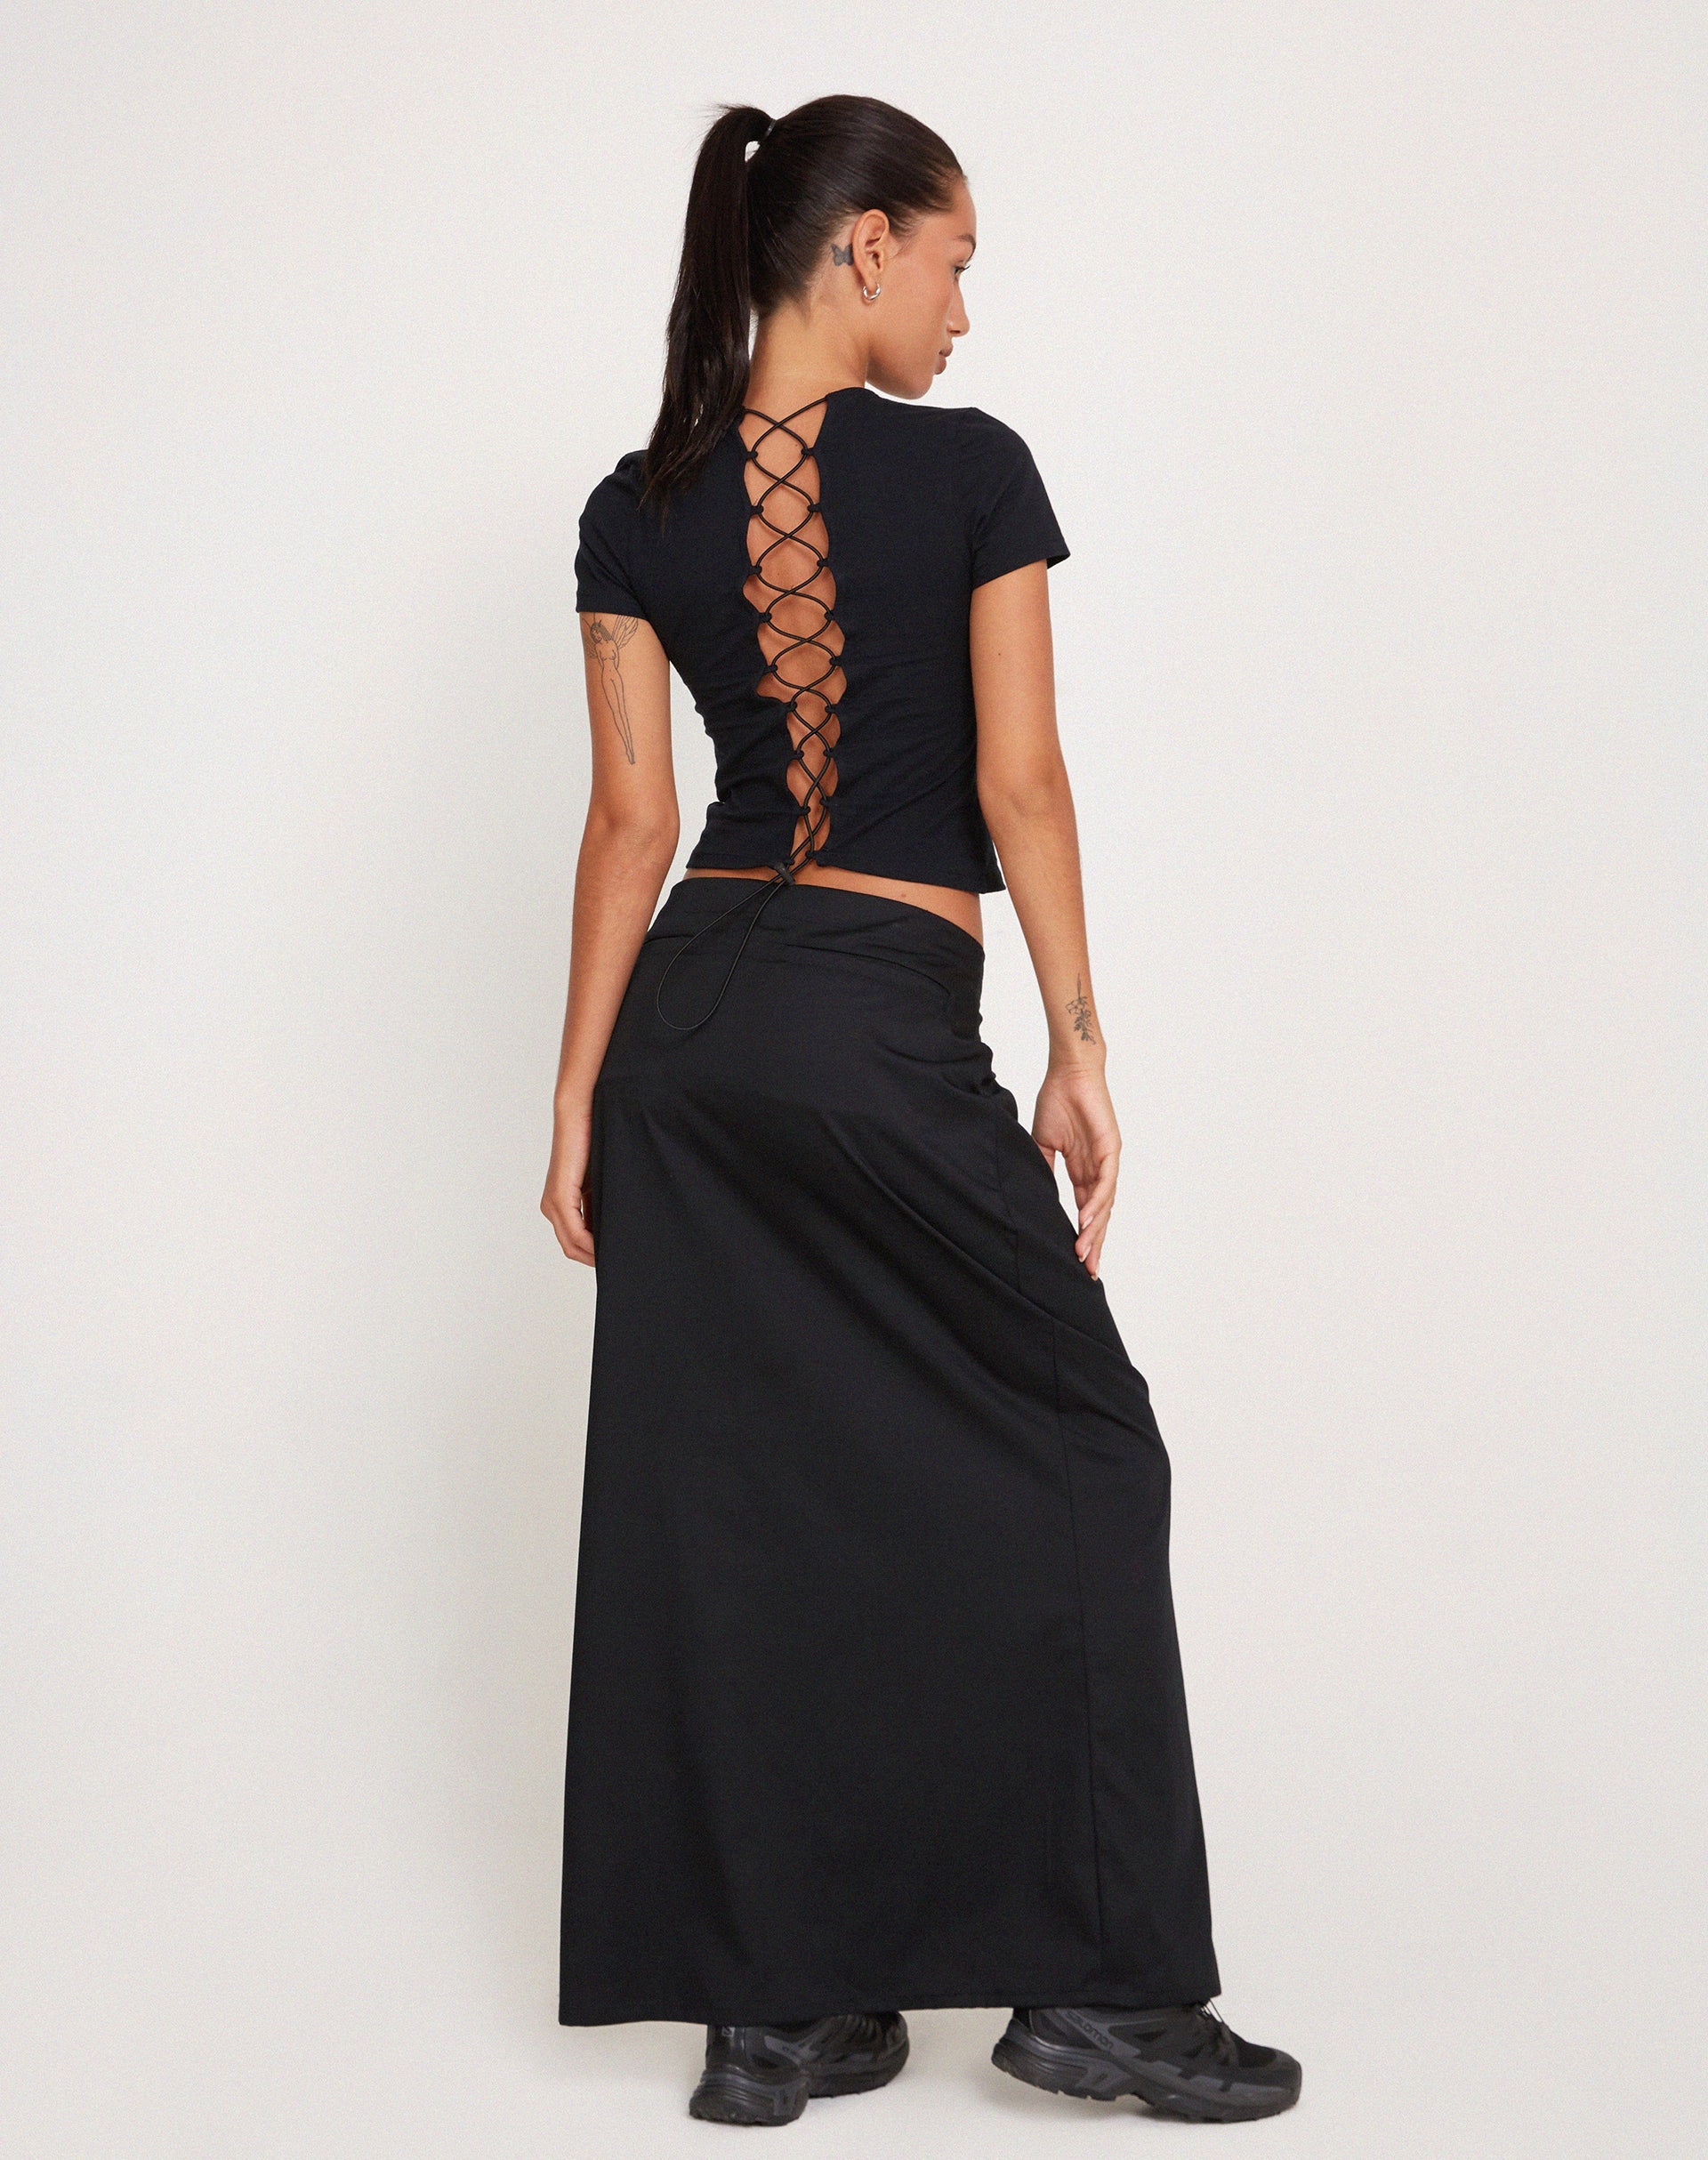 Image of Sayda Lace Back Top in Black